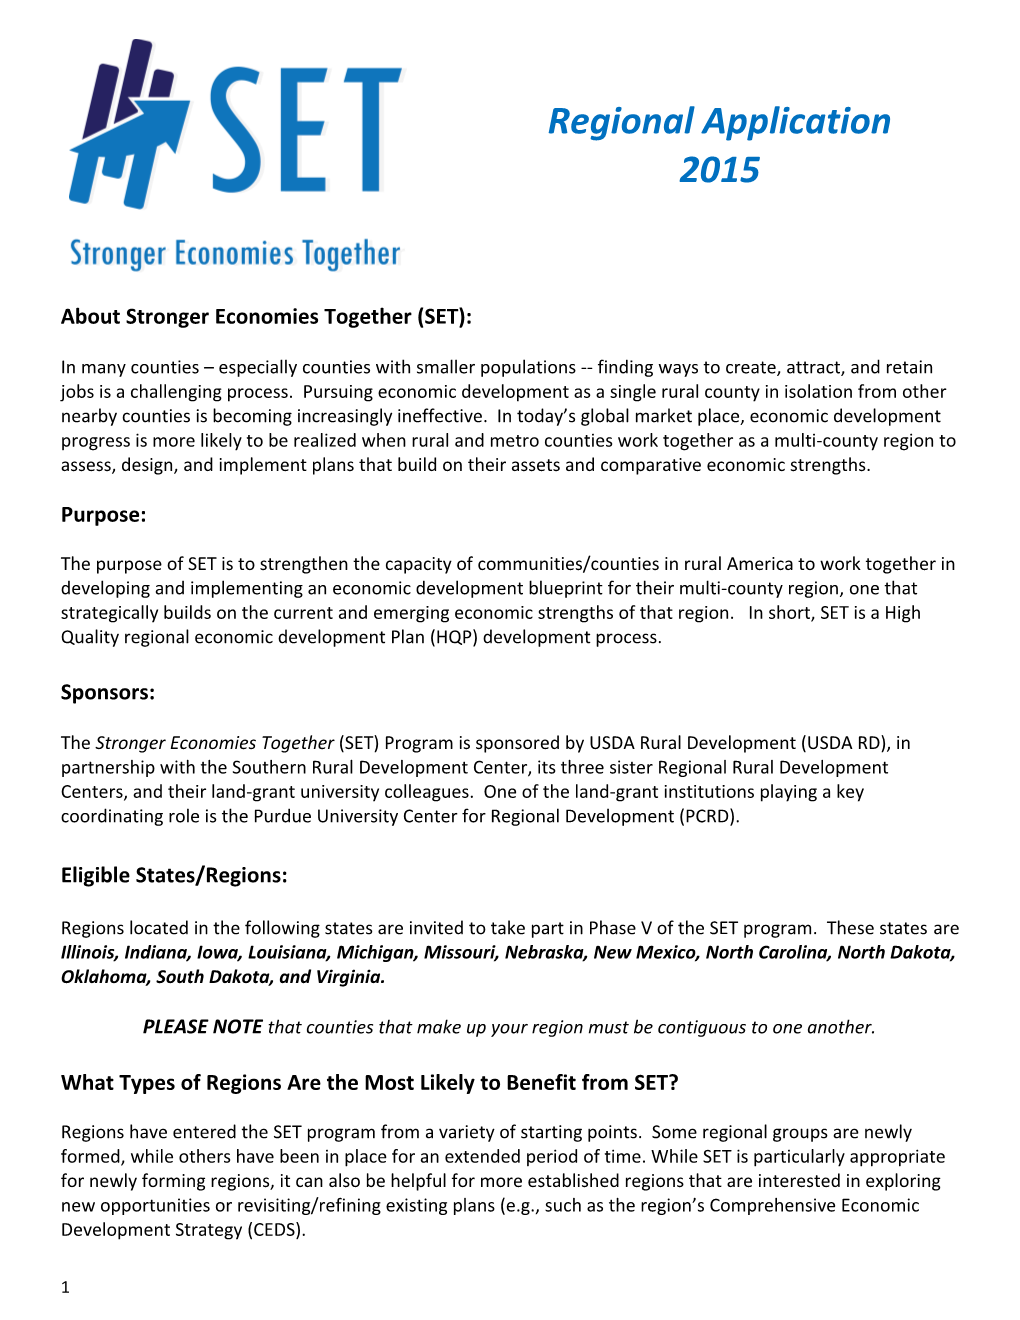 About Stronger Economies Together (SET)